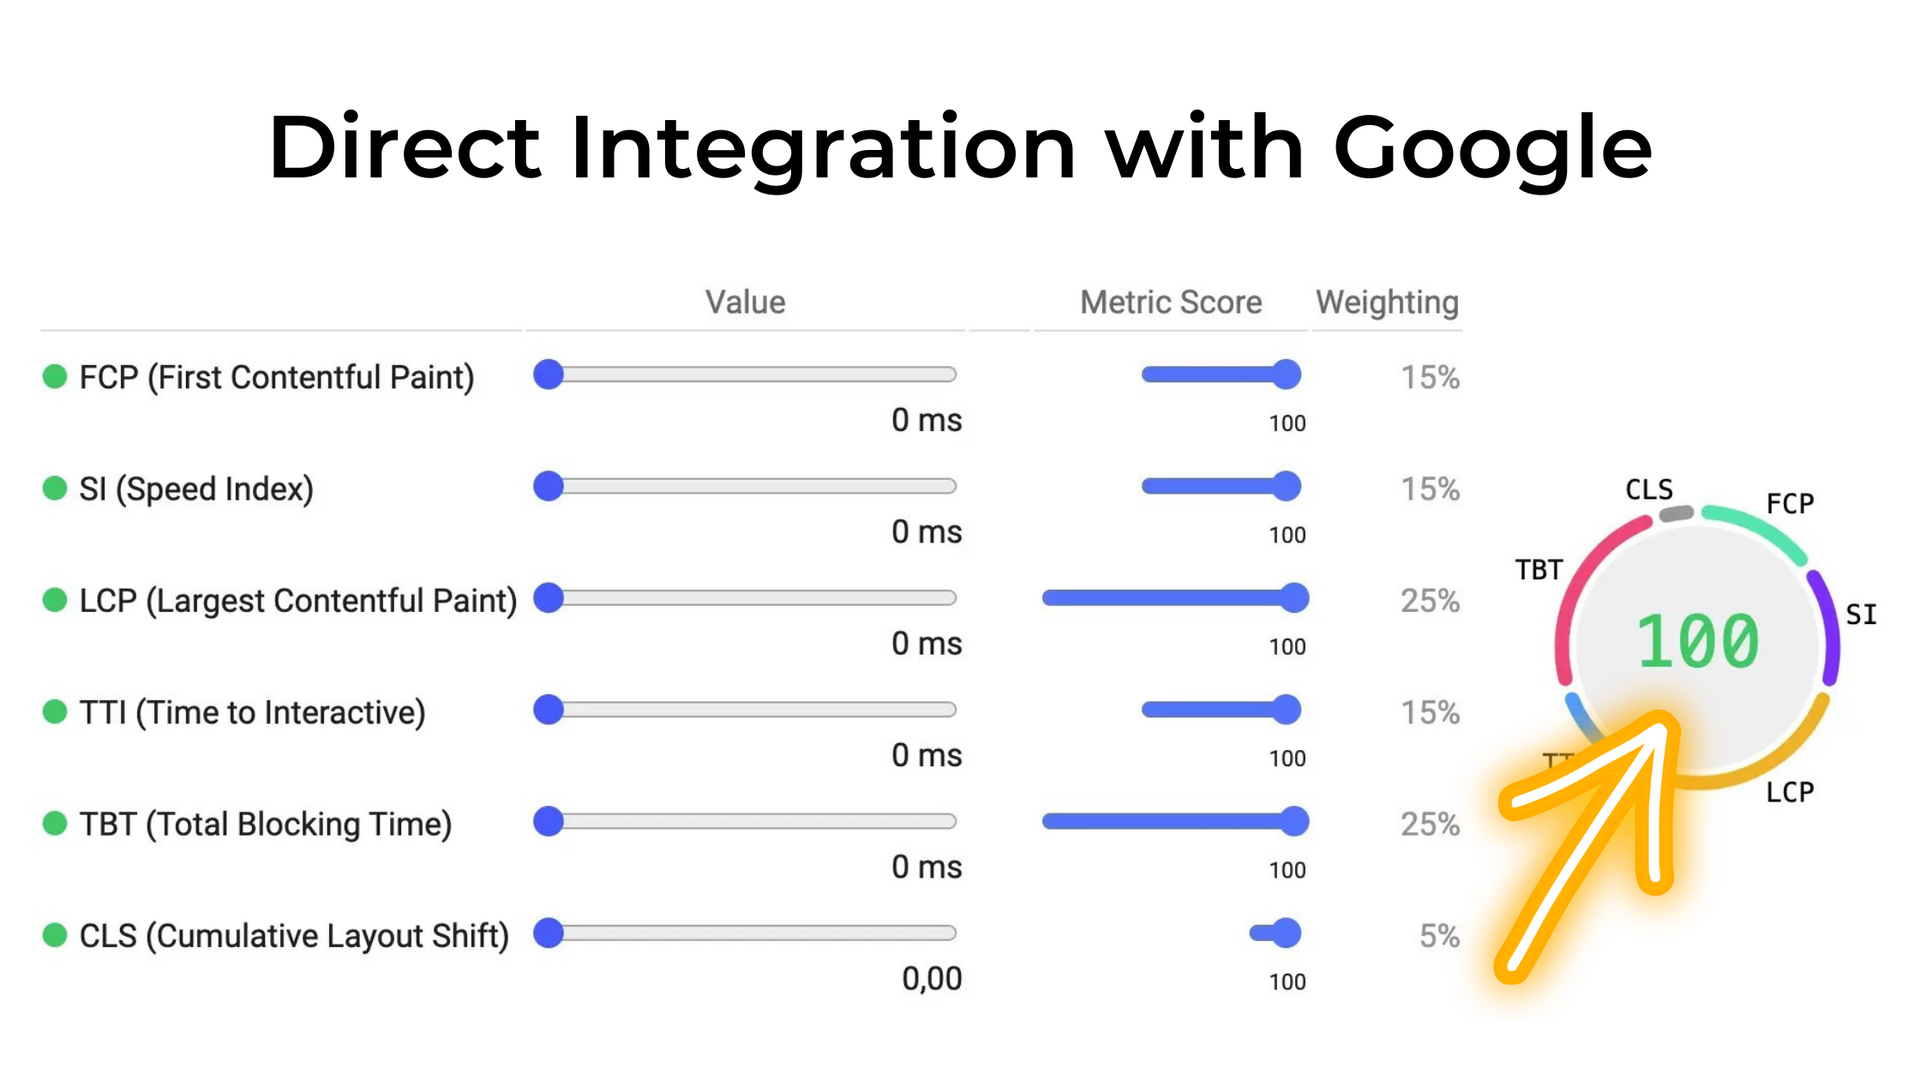 Direct Integration with Google